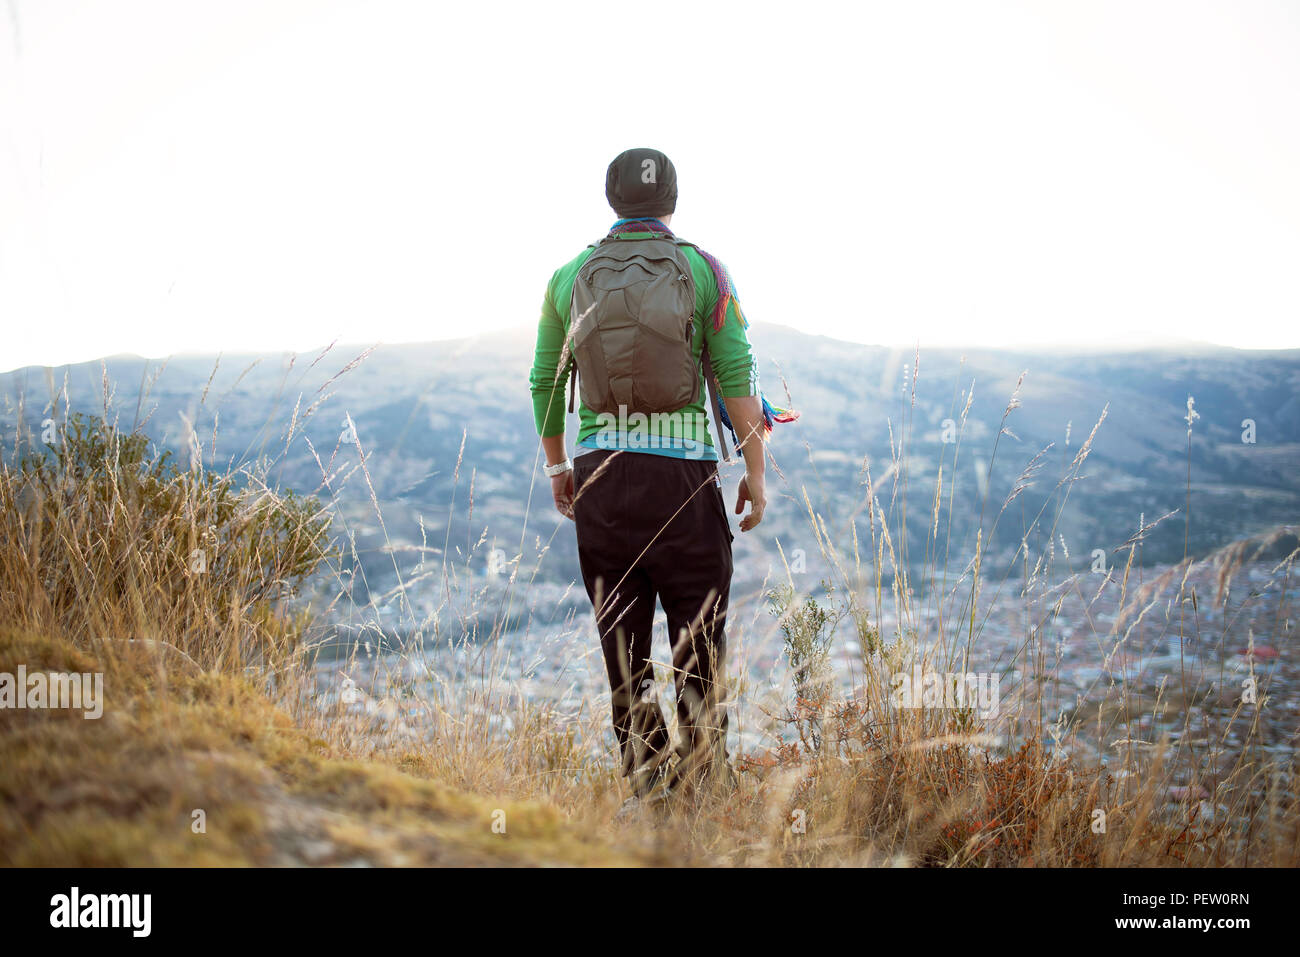 Sporty backpacker man from behind walking downhill with scenic city views. Trekking in nature, wanderlust, outdoor lifestyle. Huaraz, Peru. Jul 2018 Stock Photo